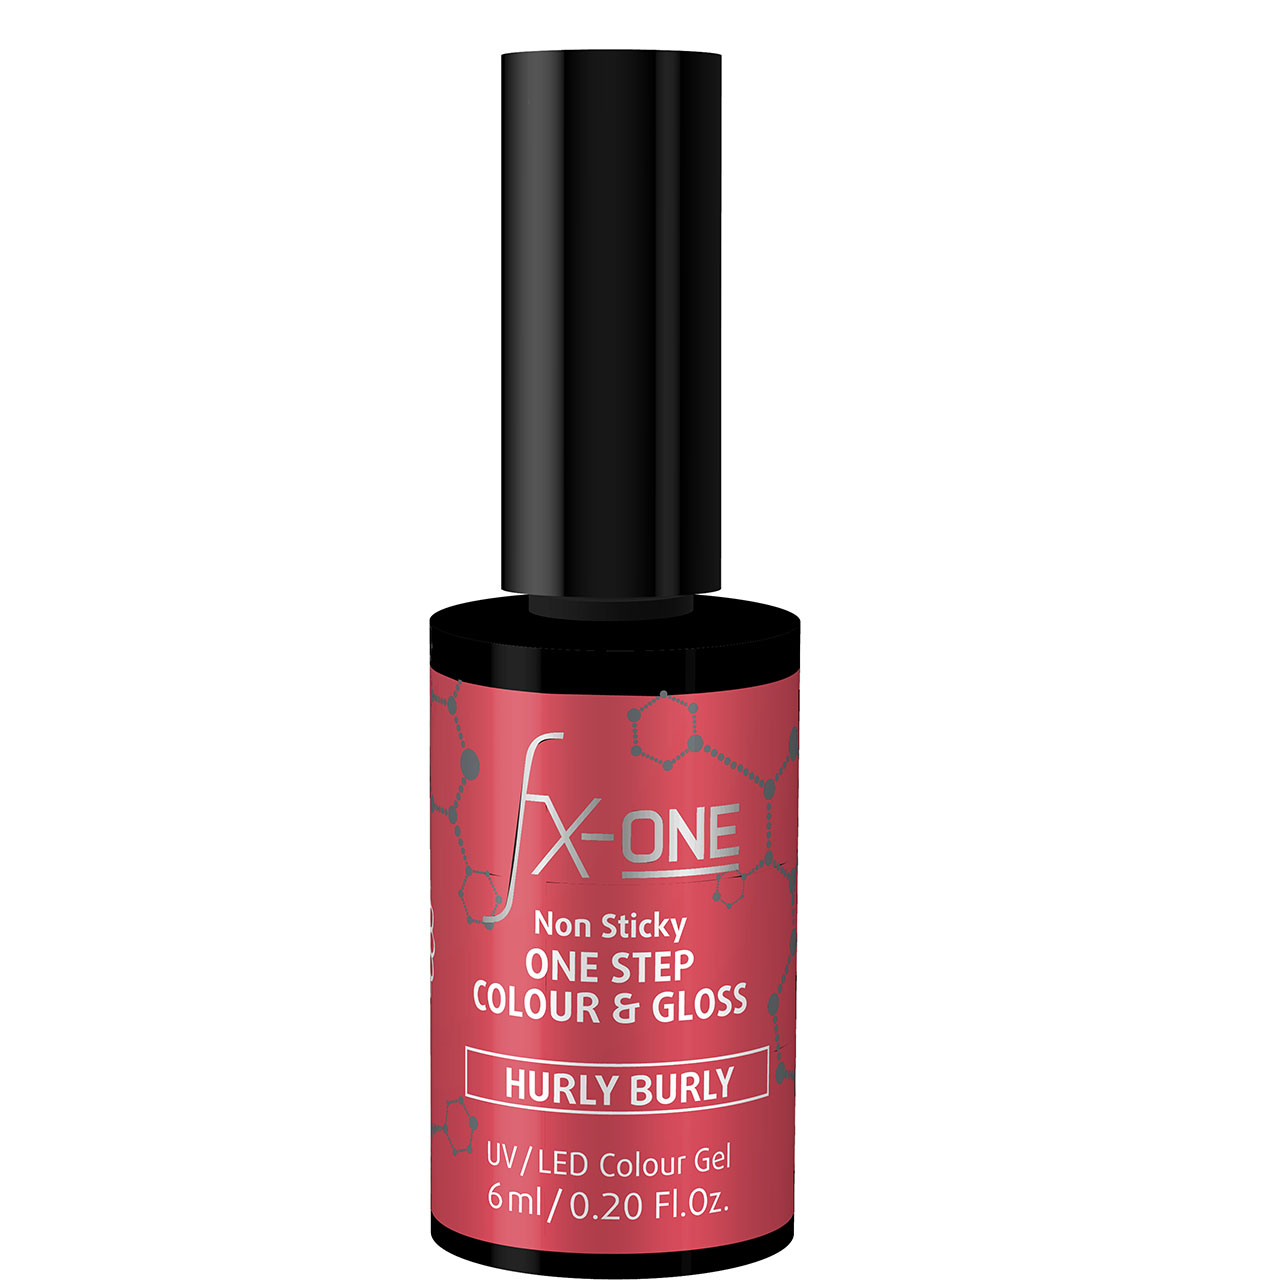 FX-One Colour & Gloss Hurly Burly